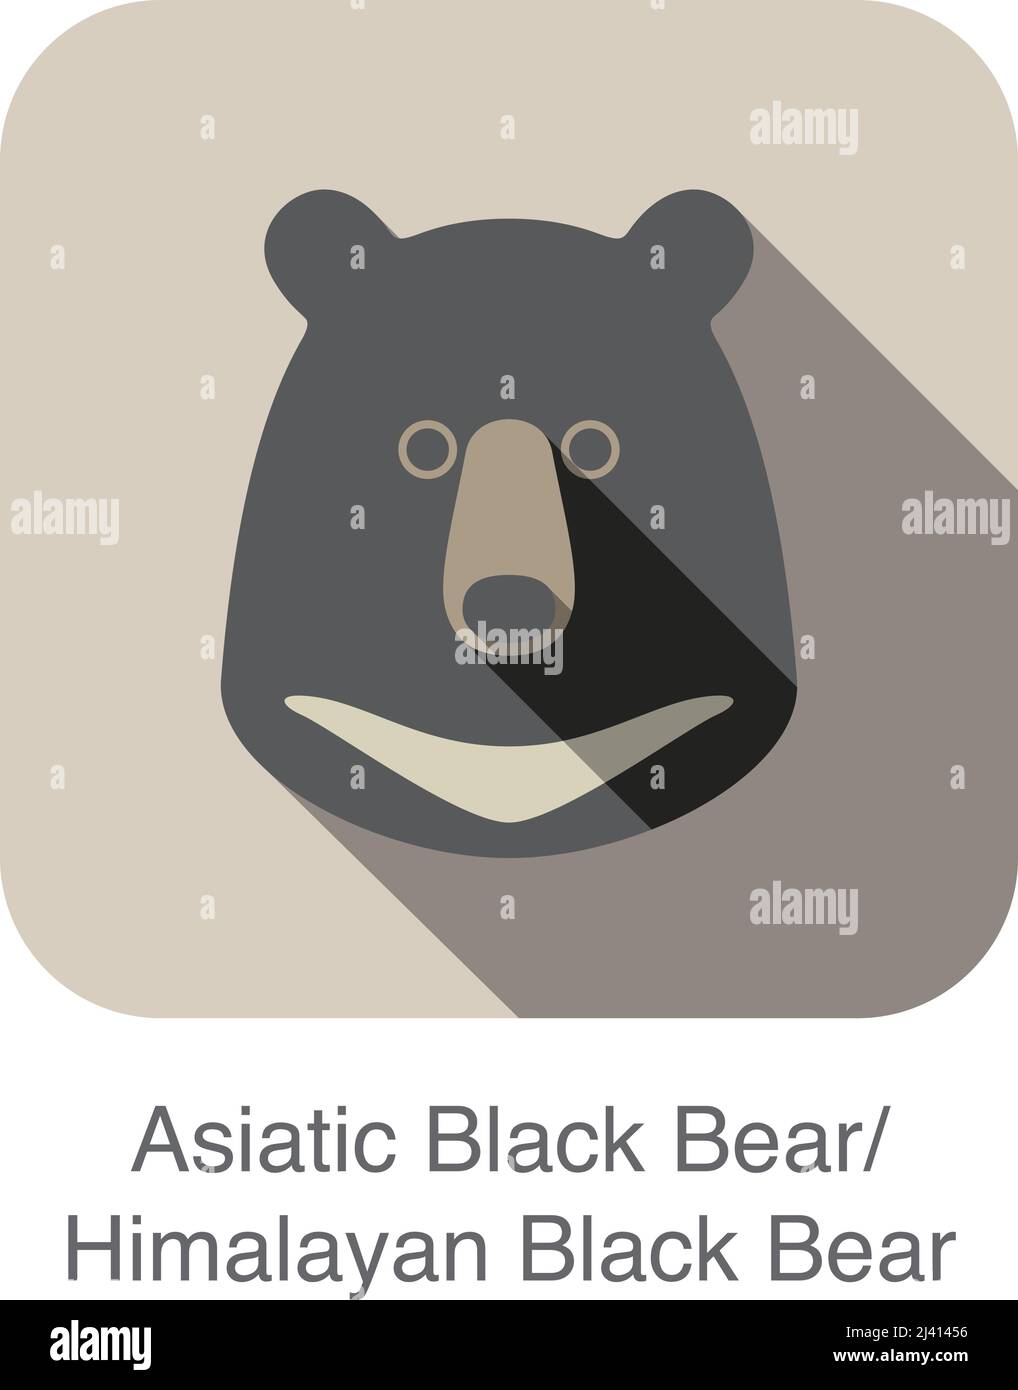 Asiatic black bear face flat icon design. Animal icons series. Stock Vector